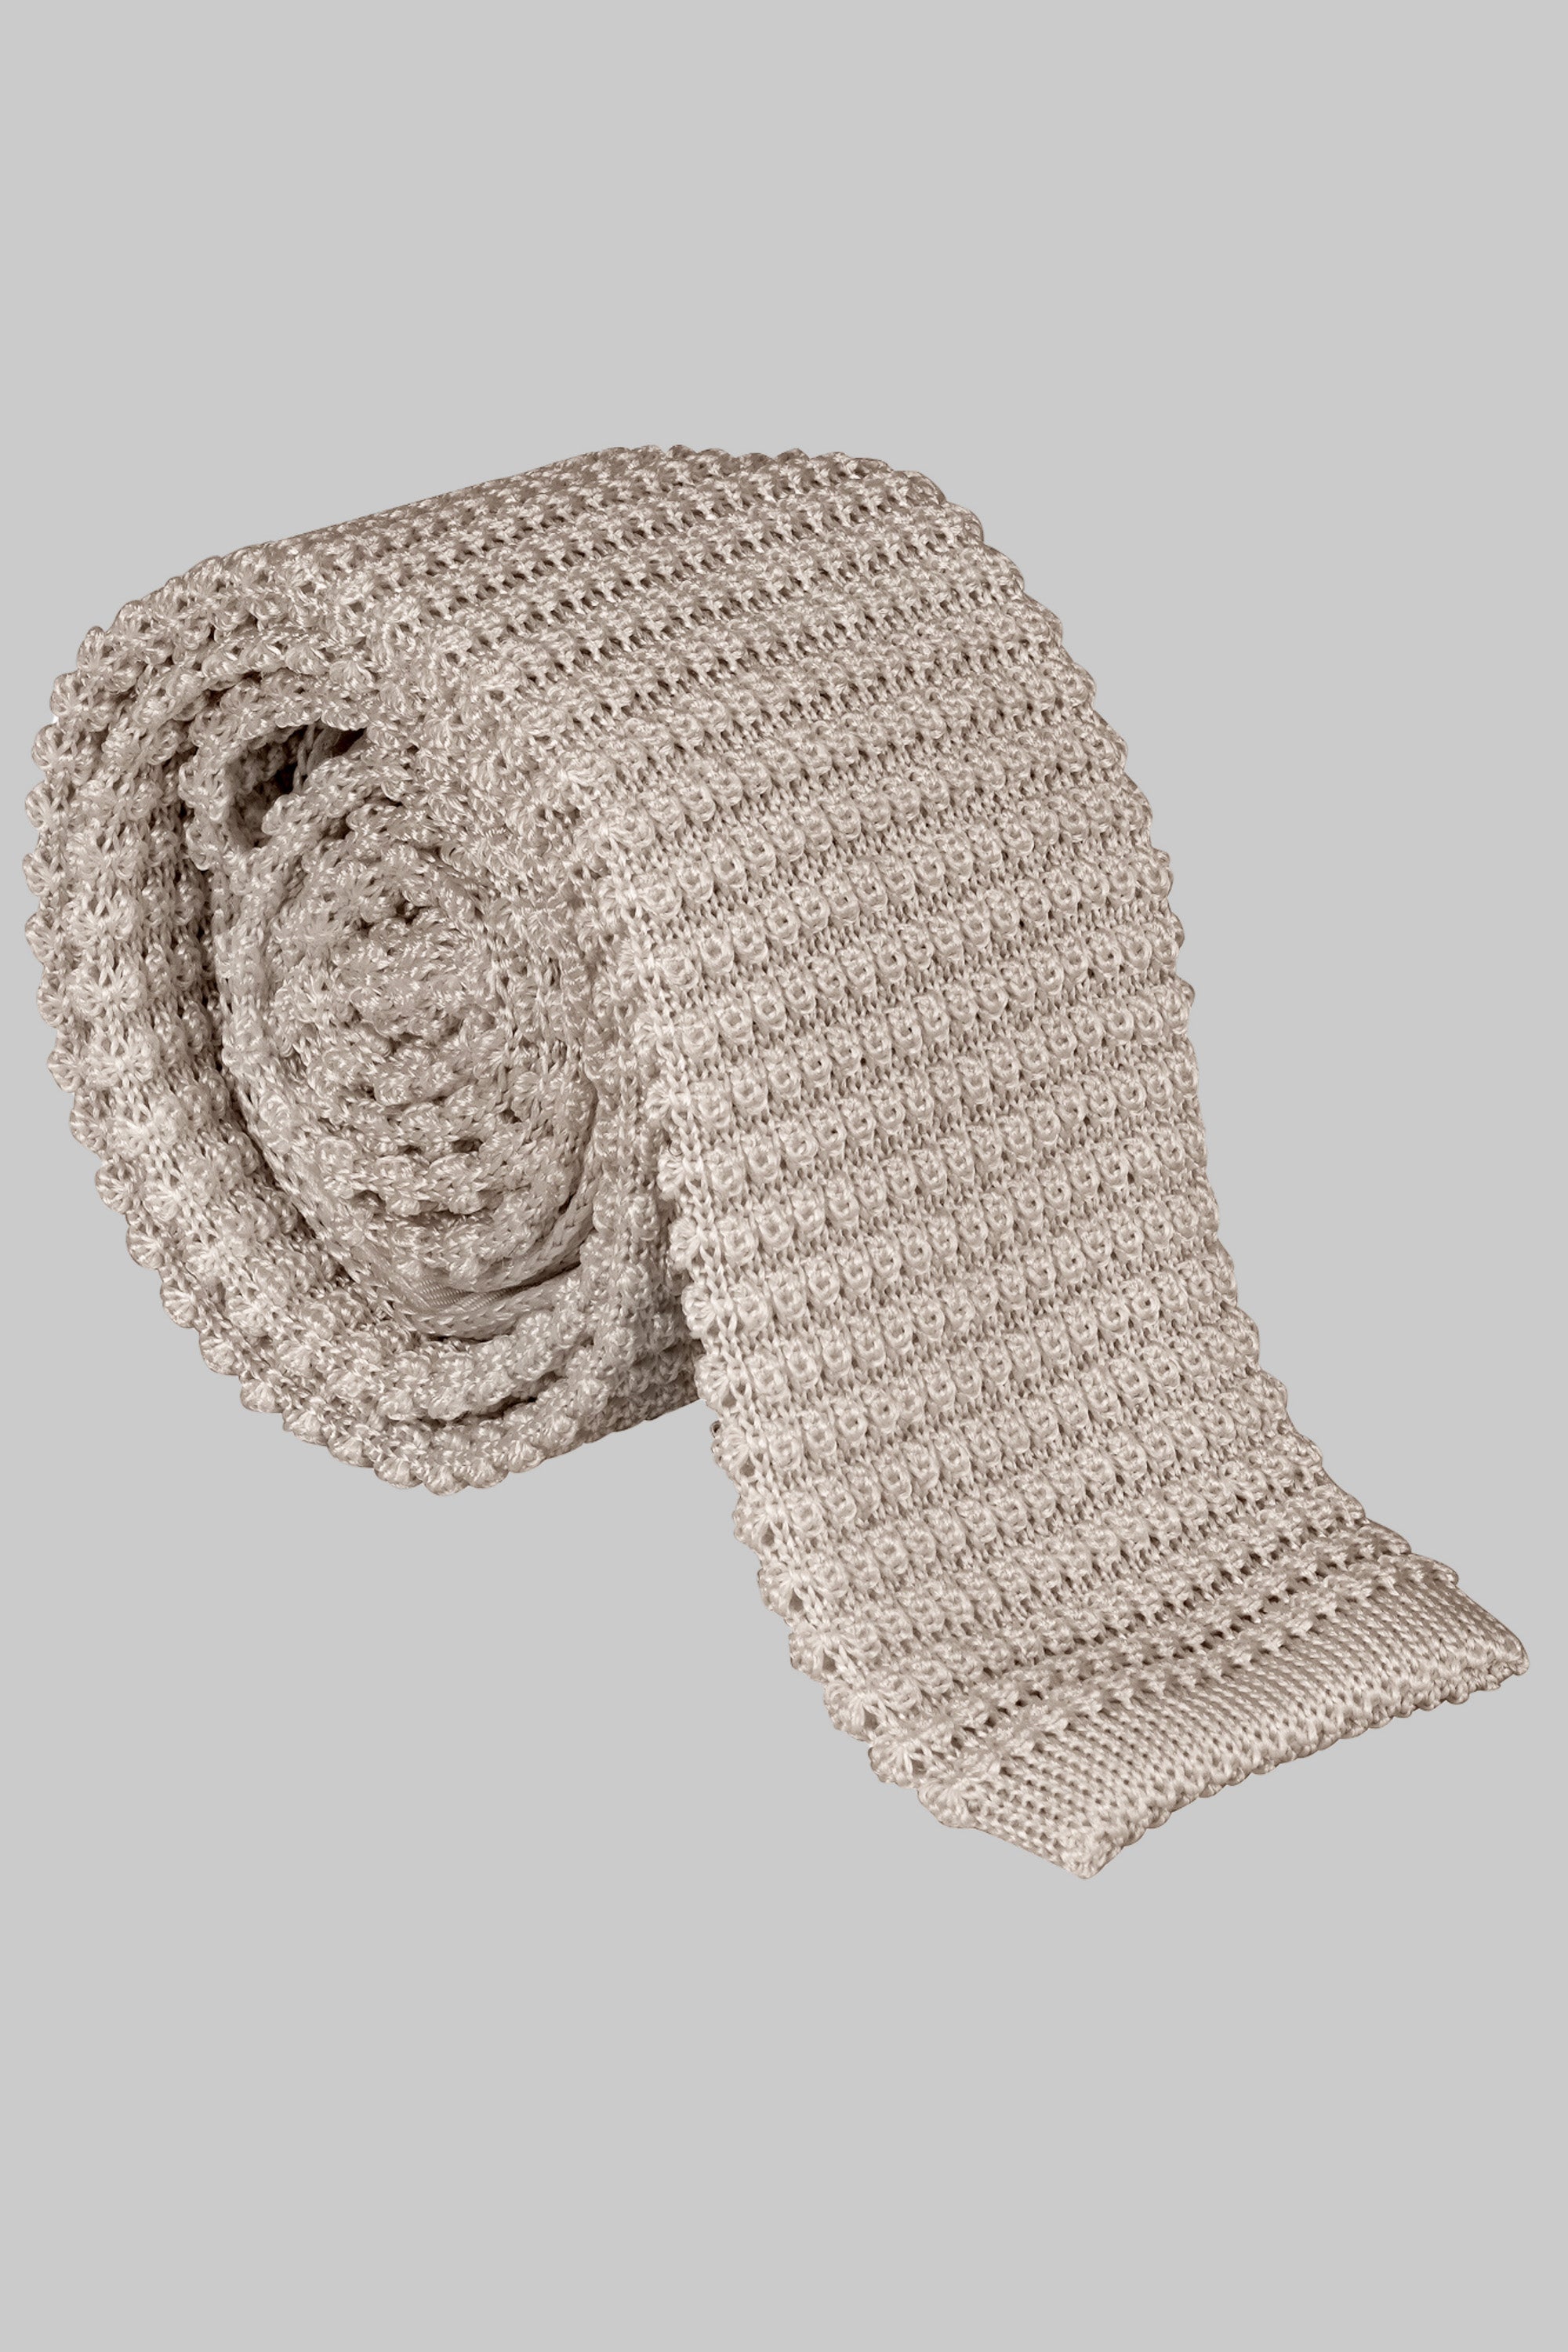 Alt view 1 Hudson Silk Knitted Tie in Oatmeal